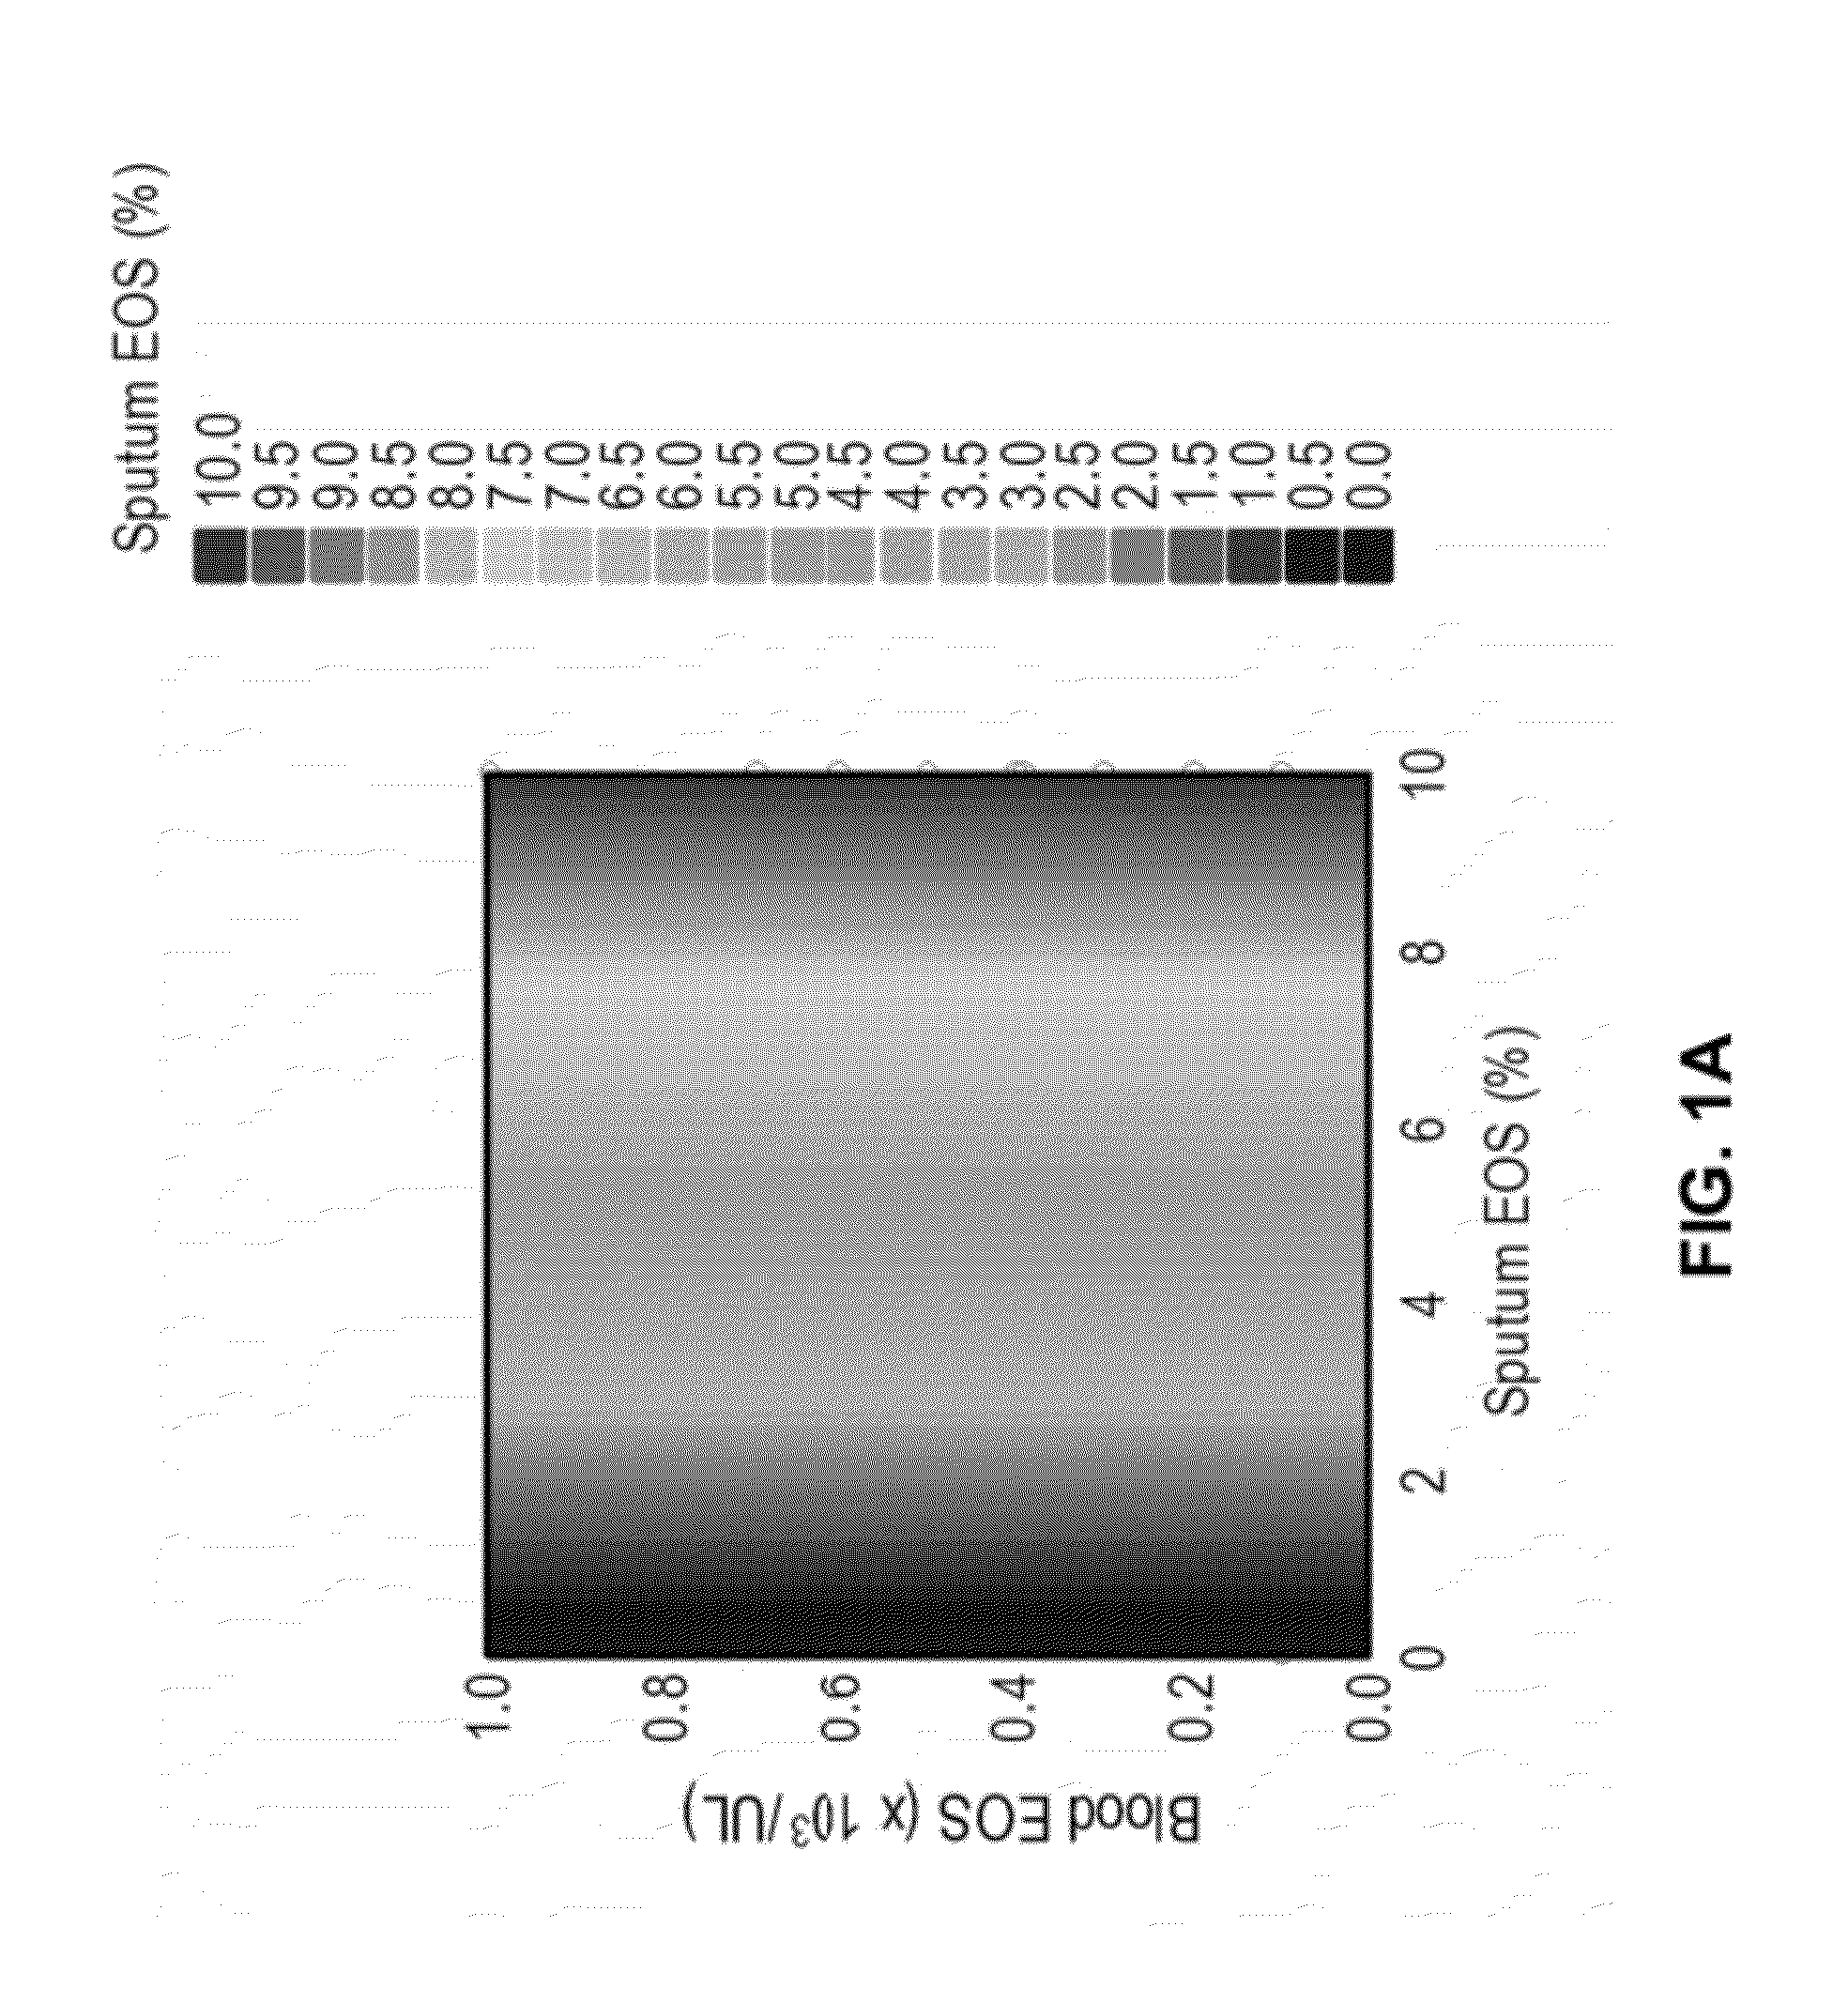 Methods Of Diagnosing And Treating Pulmonary Diseases Or Disorders